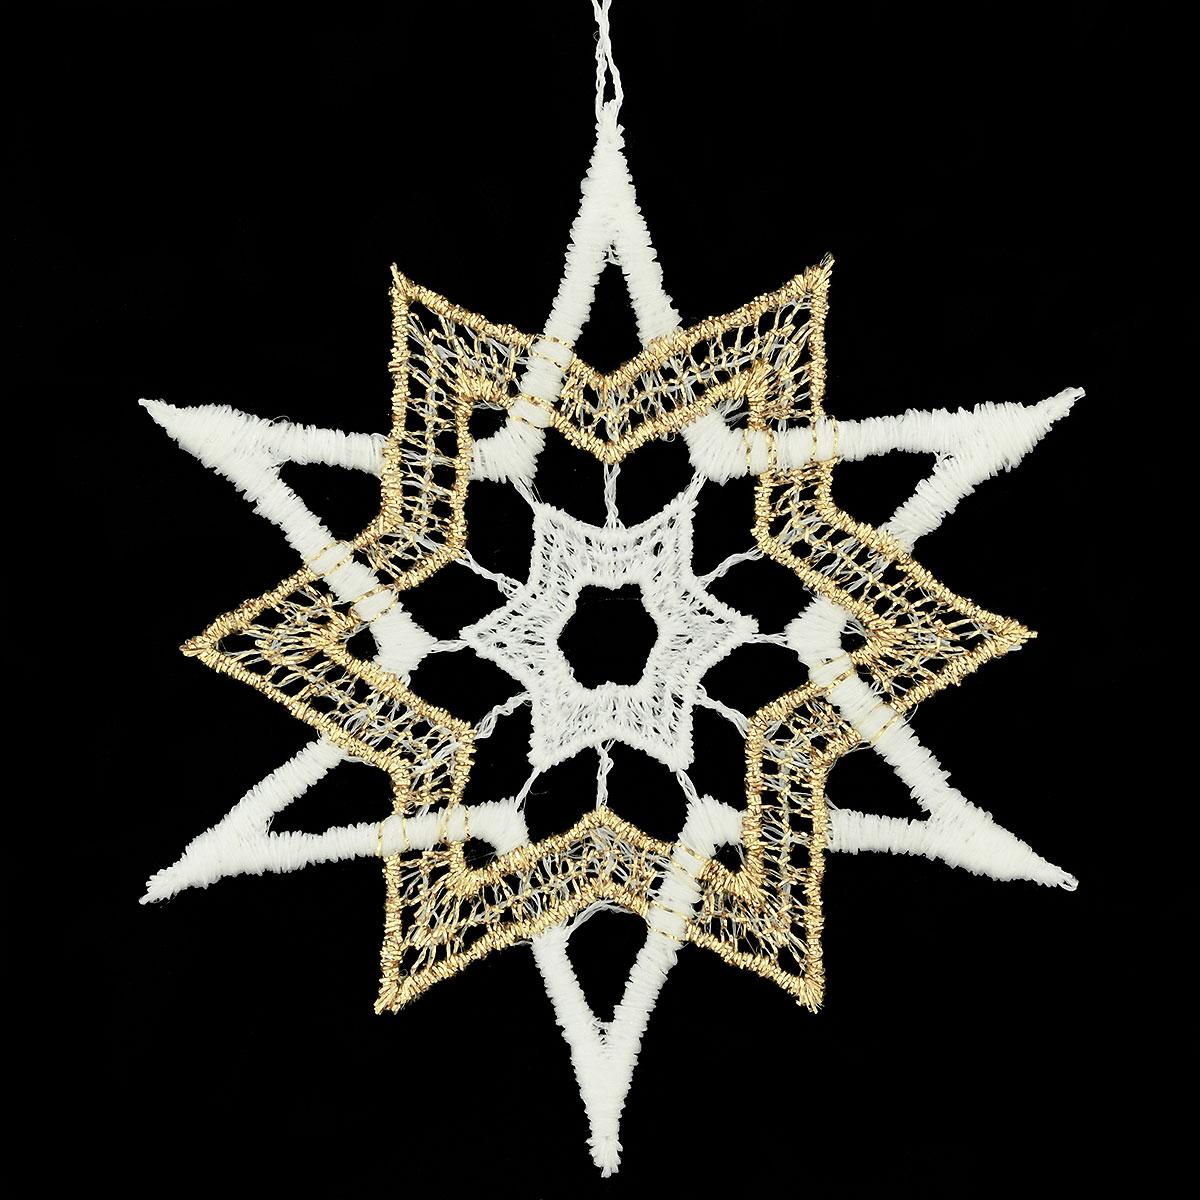 Star With Gold Lace Design